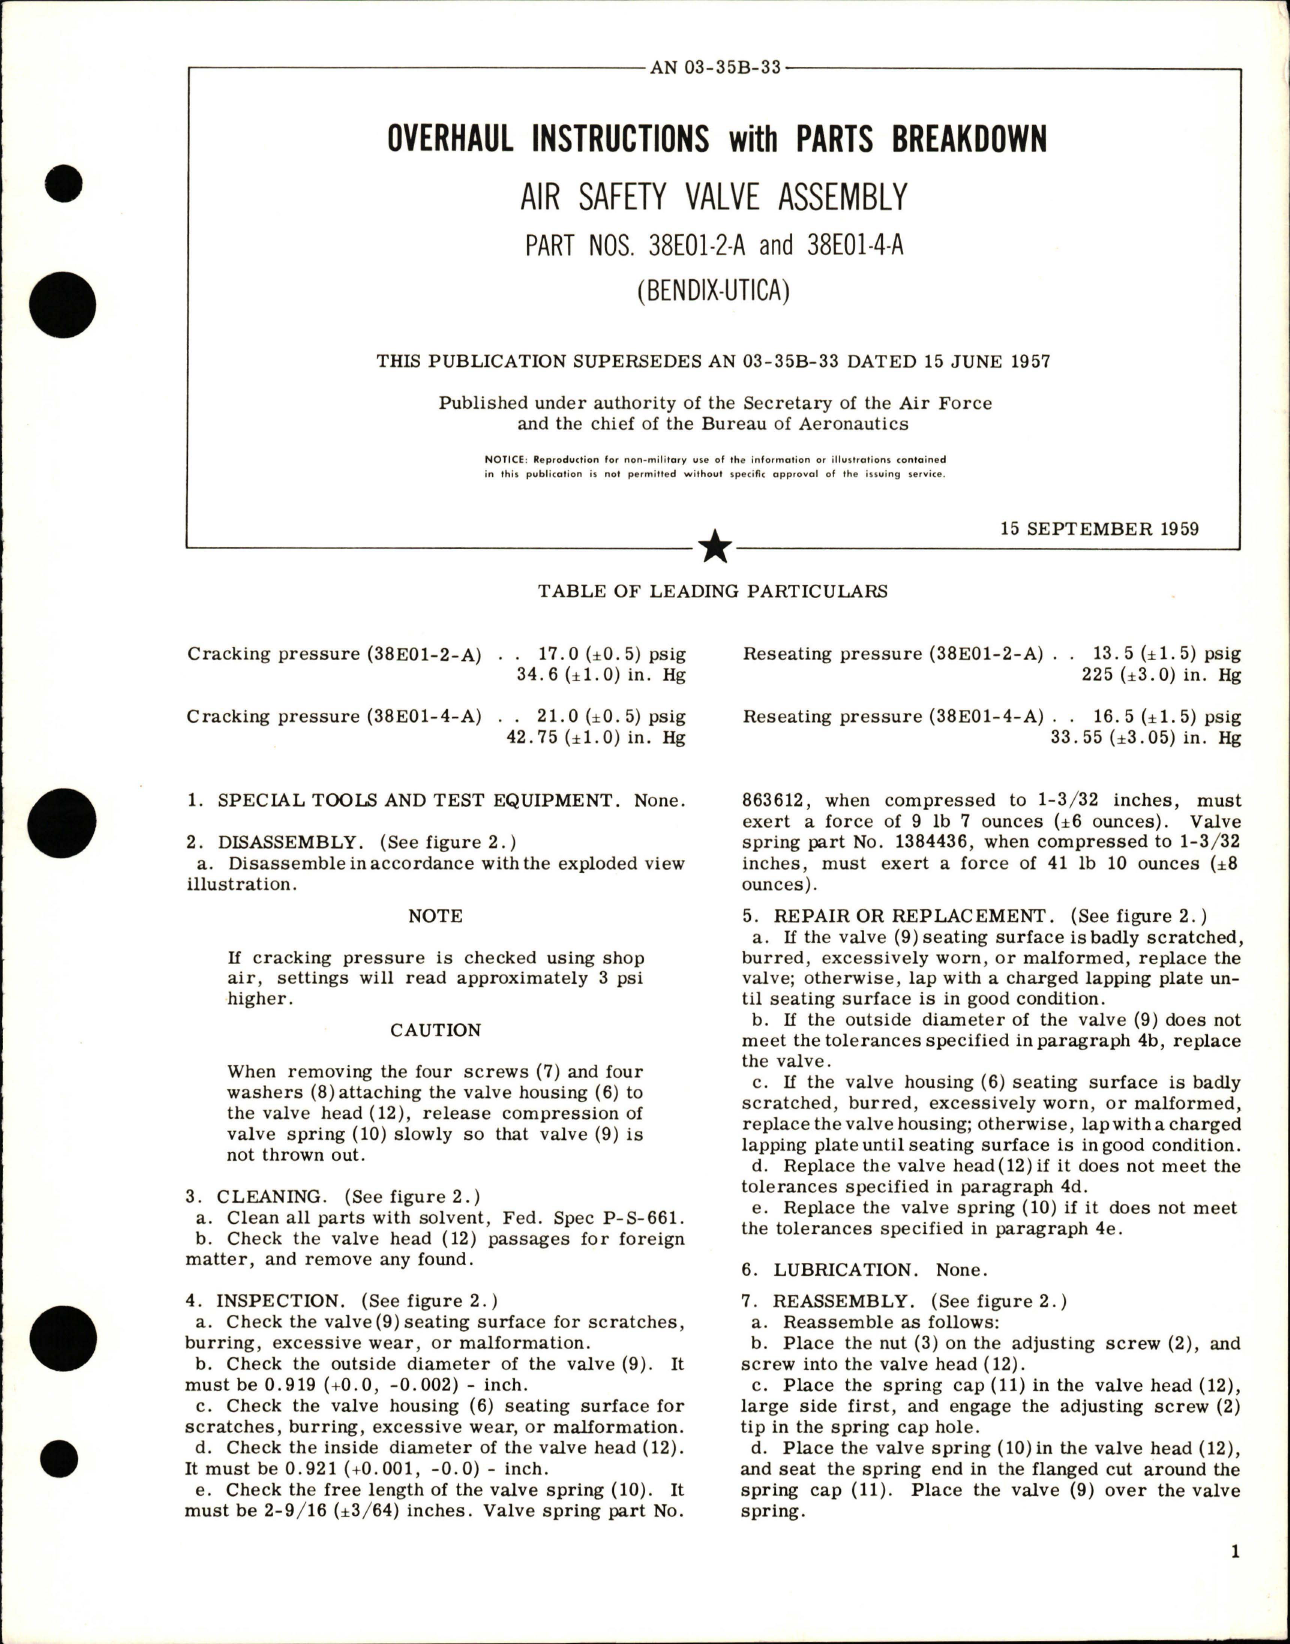 Sample page 1 from AirCorps Library document: Overhaul Instructions with Parts Breakdown for Air Safety Valve Assembly - Parts 38E01-2-A and 38E01-4-A